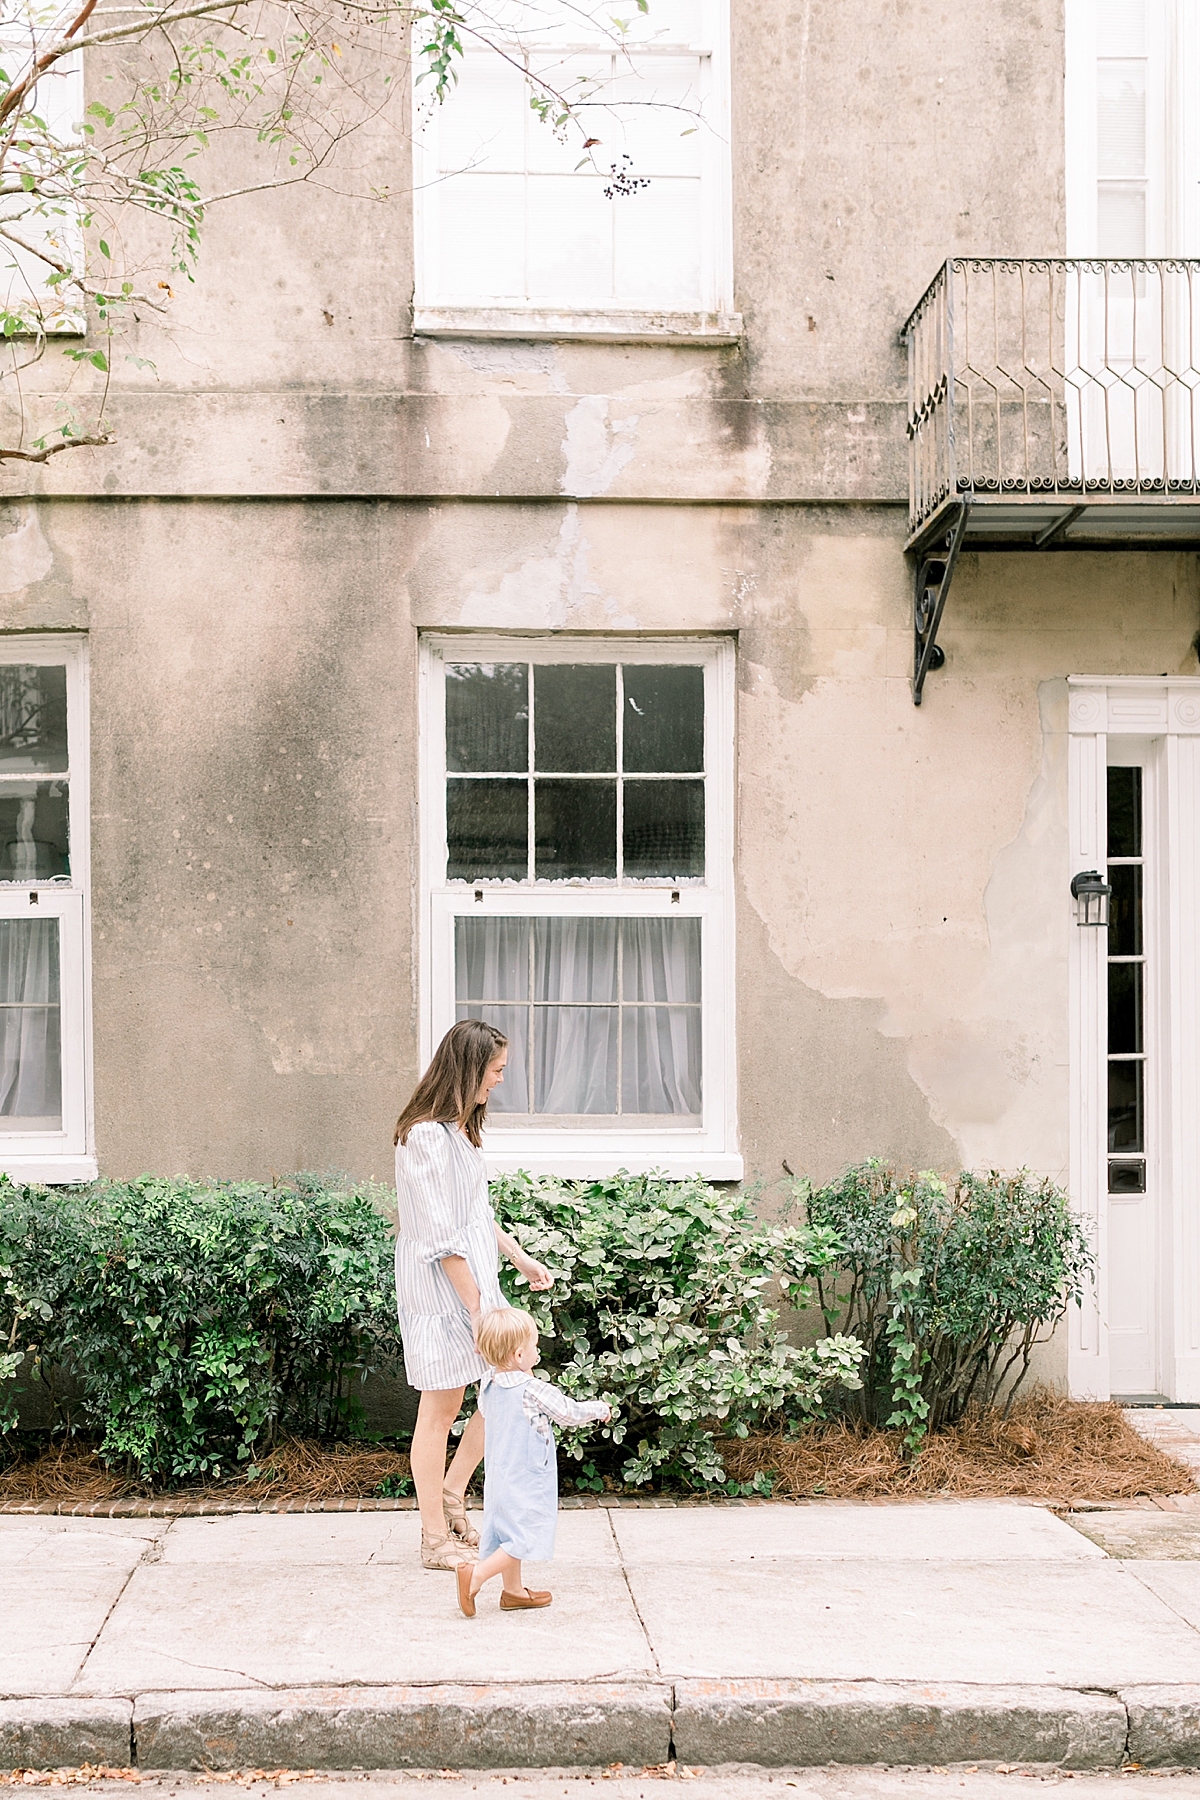 Mom walking with toddler on streets of historic downtown Charleston. Photo by Caitlyn Motycka Photography.